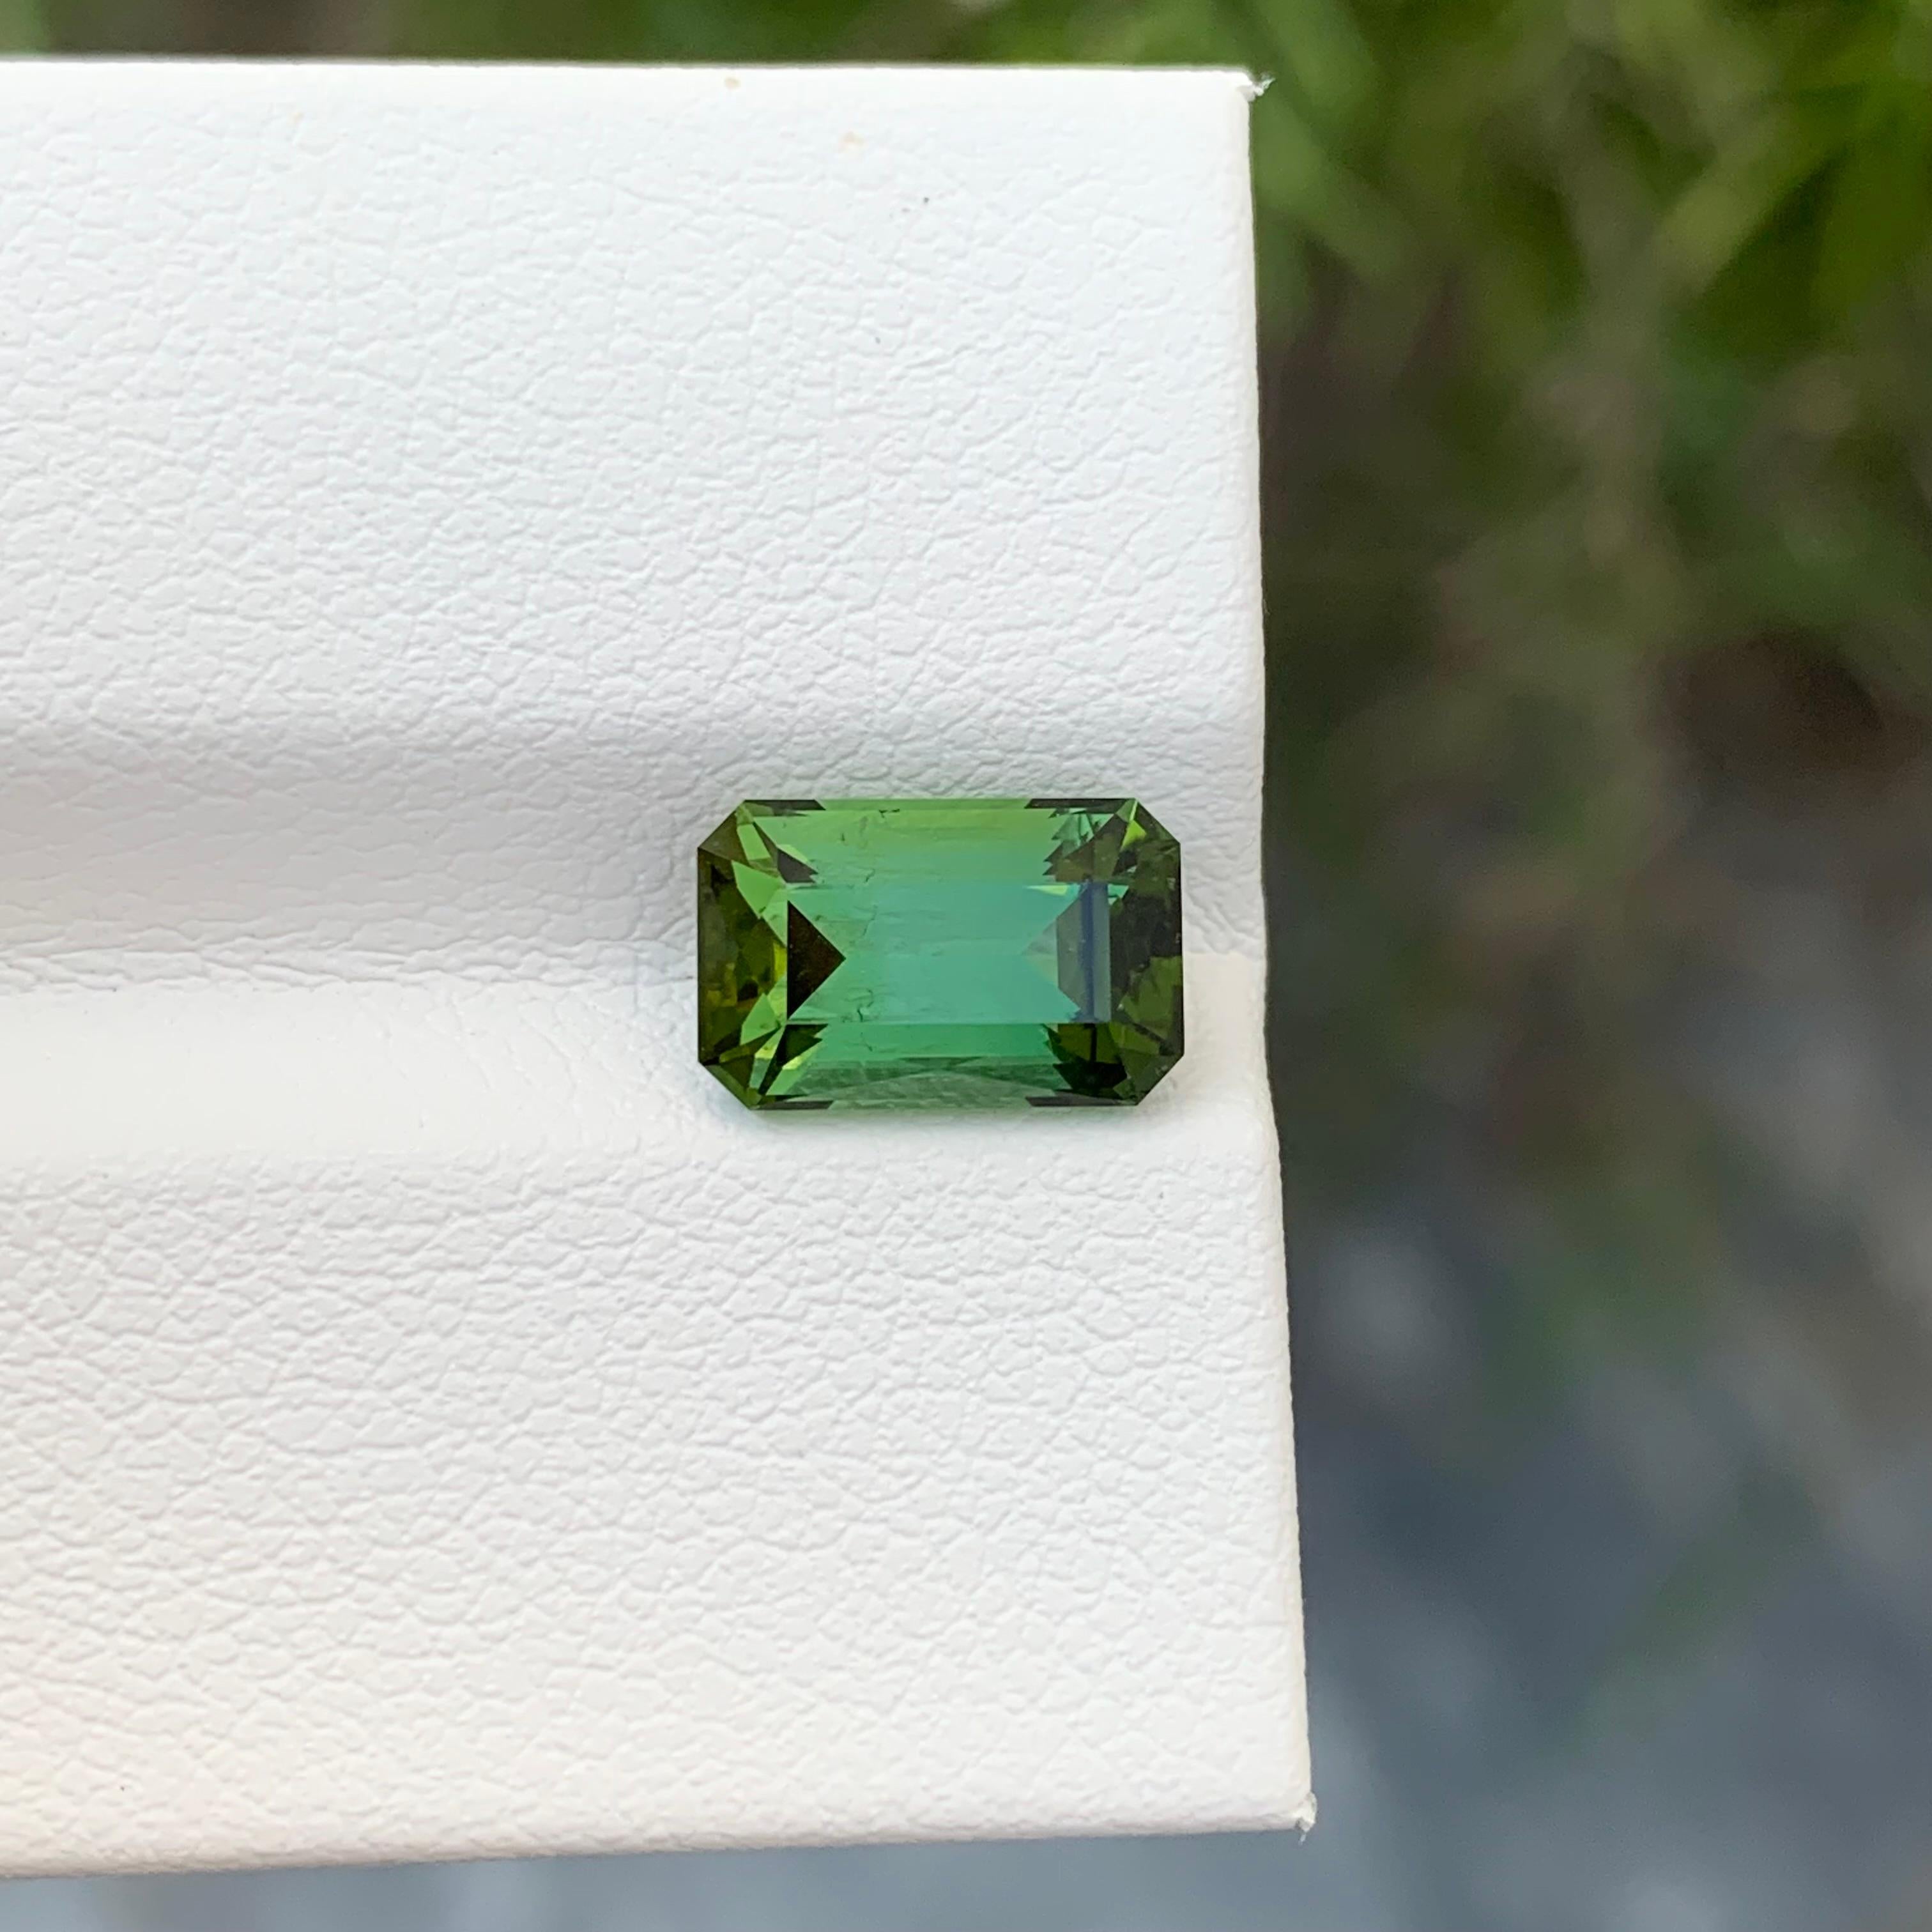 Loose Green Tourmaline

Weight: 2.25 Carats
Dimension: 9.2 x 5.9 x 4.9 Mm
Colour: Green
Origin: Afghanistan
Certificate: On Demand
Treatment: Non

Tourmaline is a captivating gemstone known for its remarkable variety of colors, making it a favorite